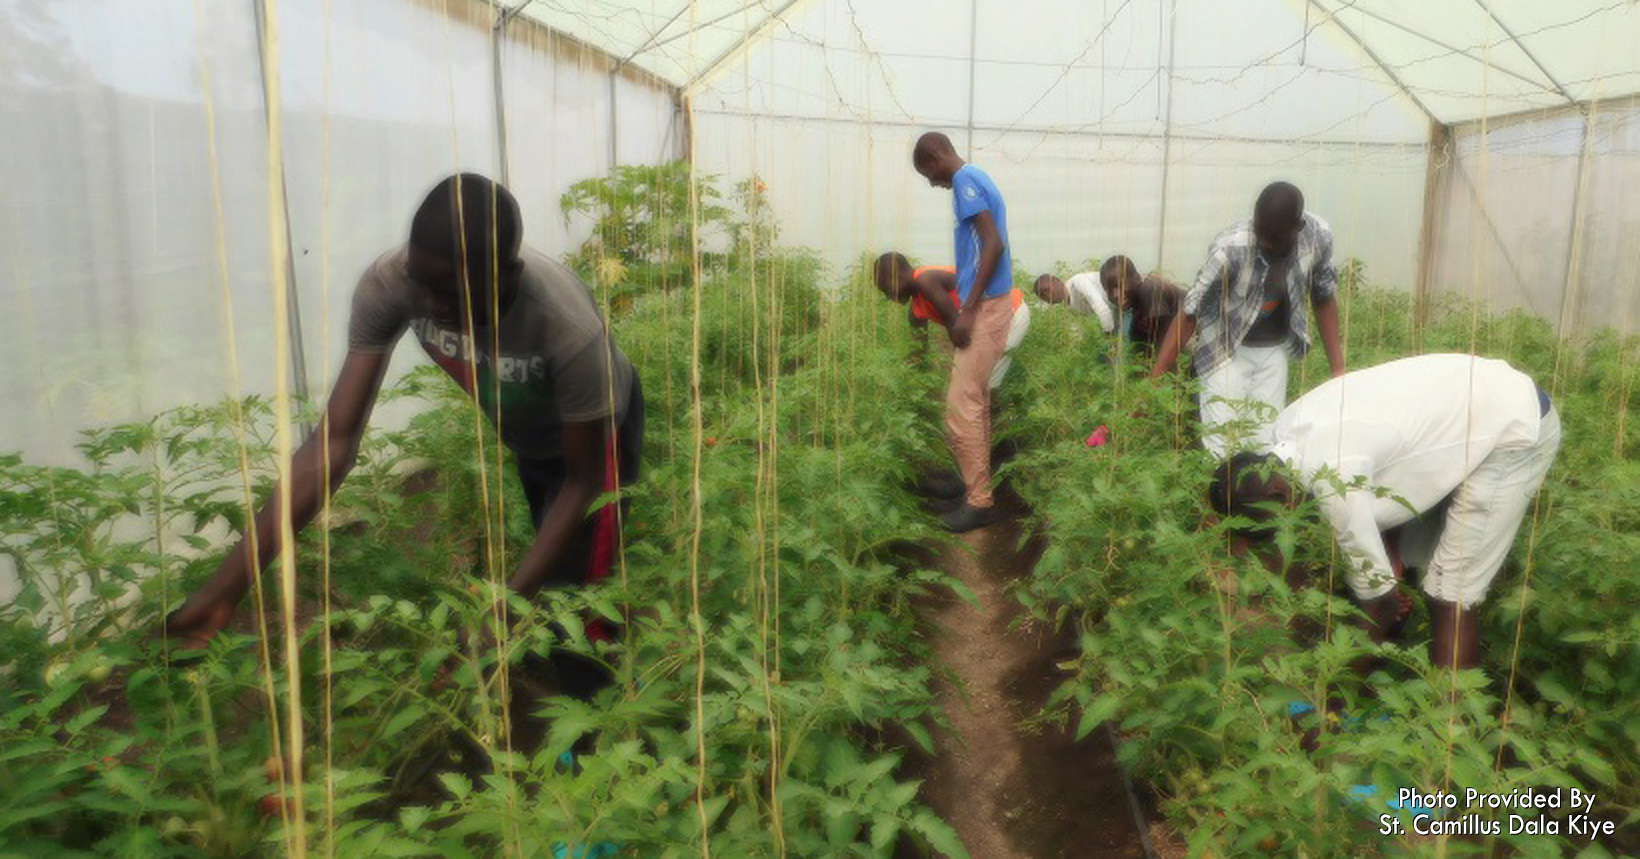 Boys from the Twiga House work in the greenhouse as part of their chores.